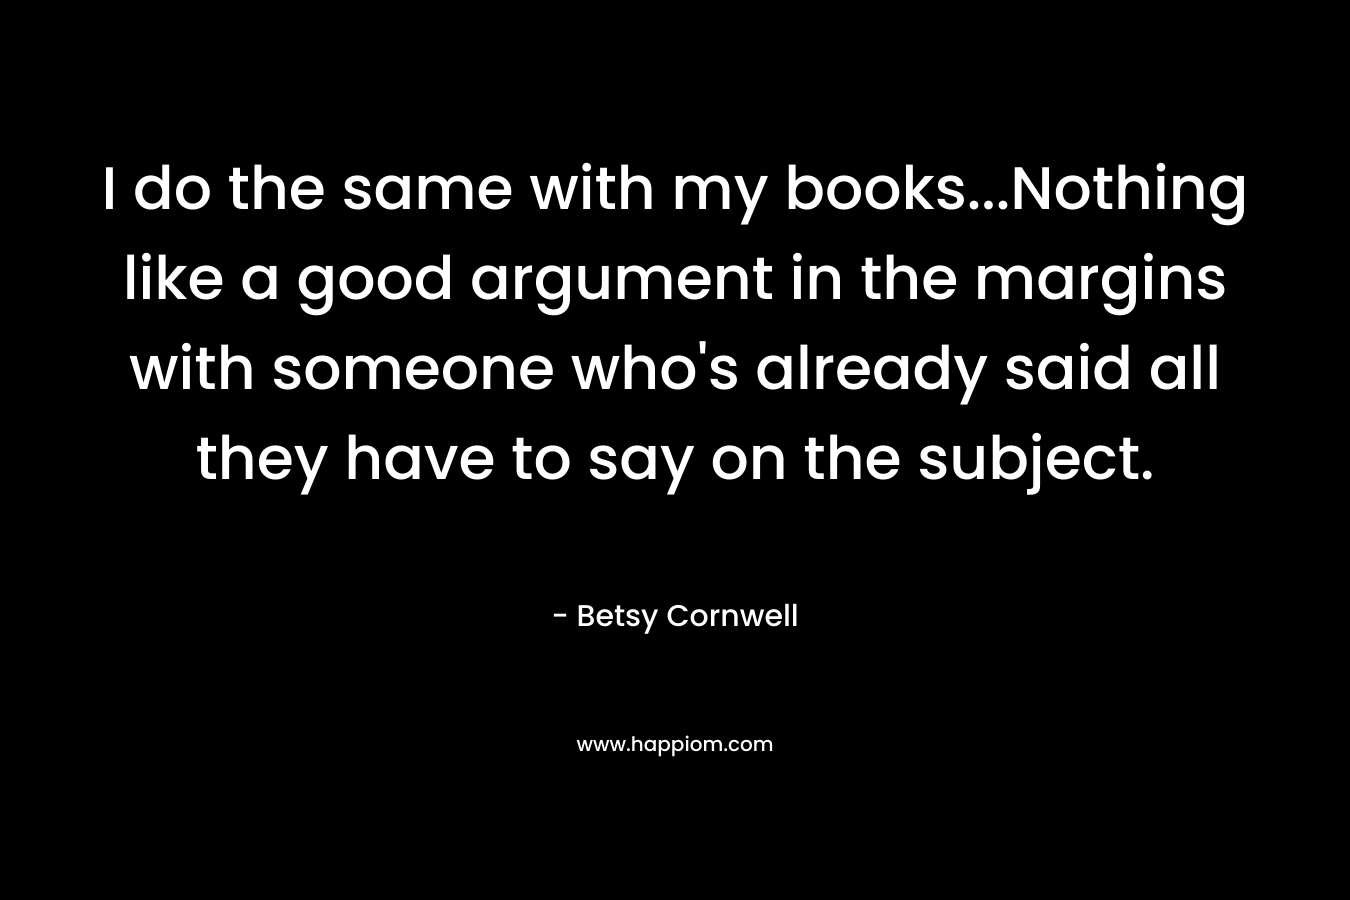 I do the same with my books…Nothing like a good argument in the margins with someone who’s already said all they have to say on the subject. – Betsy Cornwell